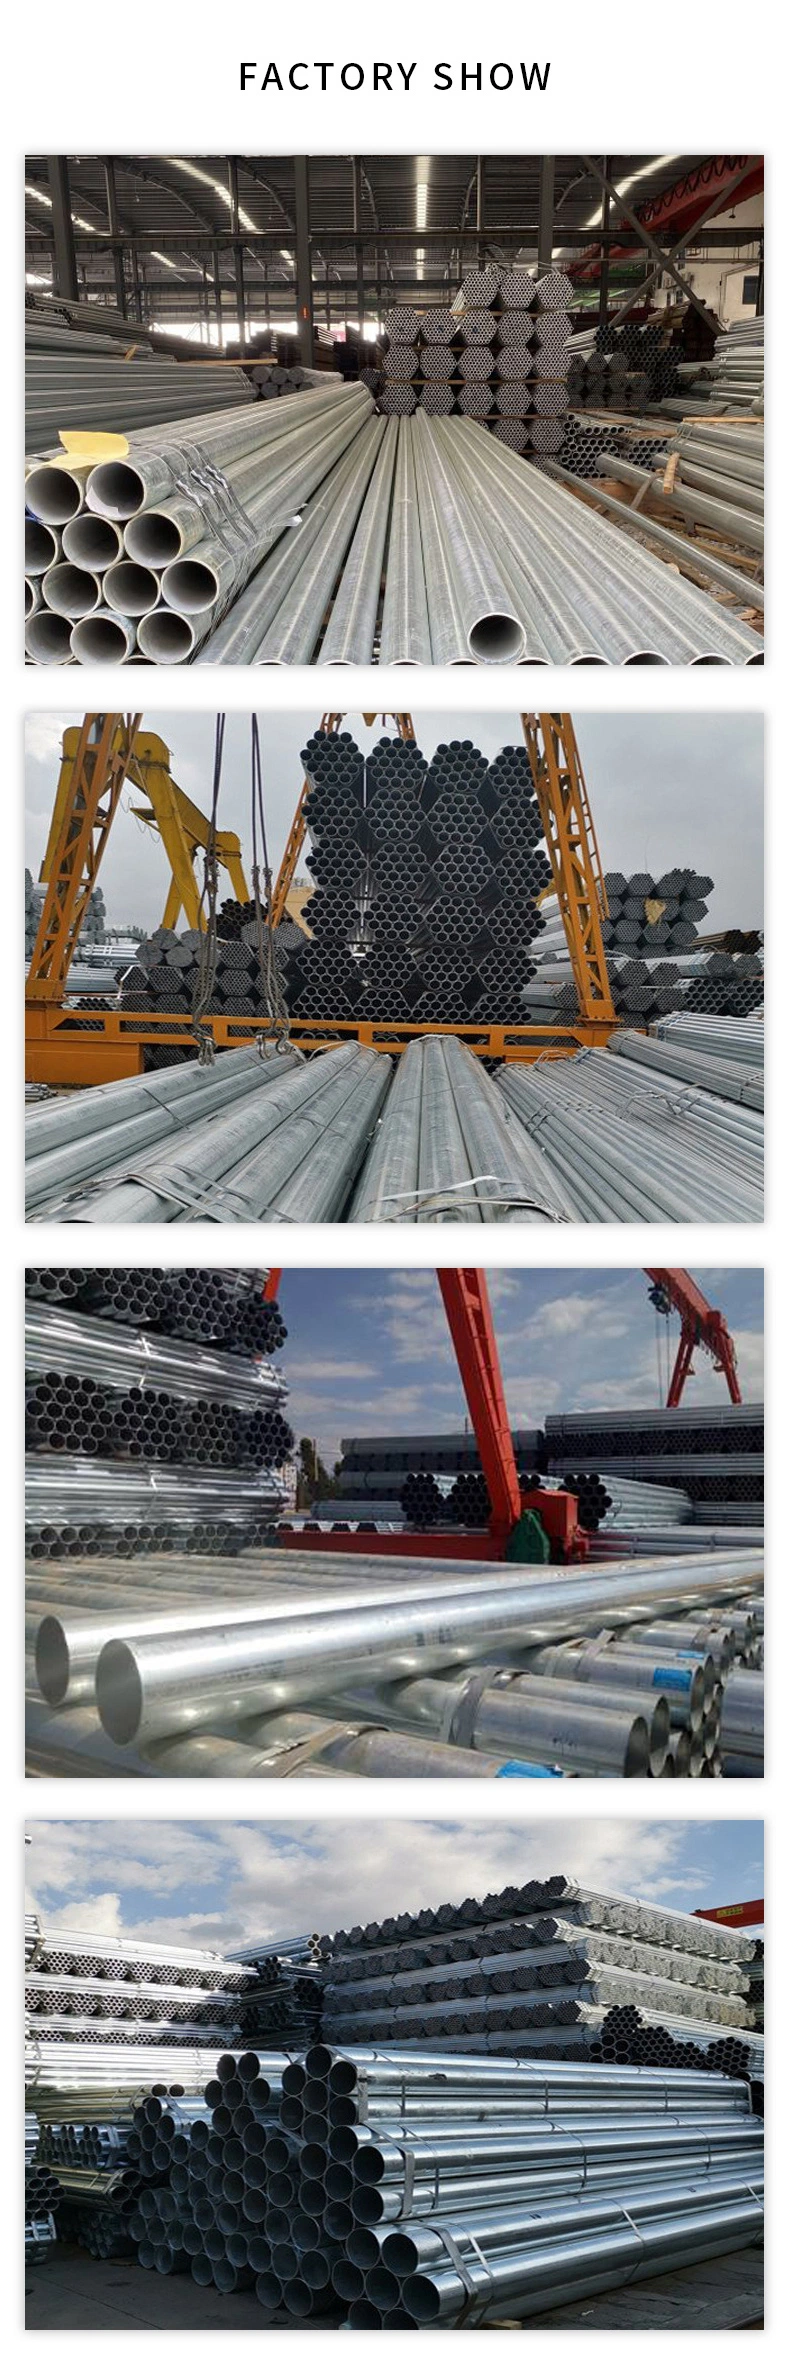 16 Inch 9.5 mm Od 70mm Seamless Welded ERW SSAW Electric Welded Straight Seam Pipe 1.25 Inch Galvanized Steel Pipes and Tubes